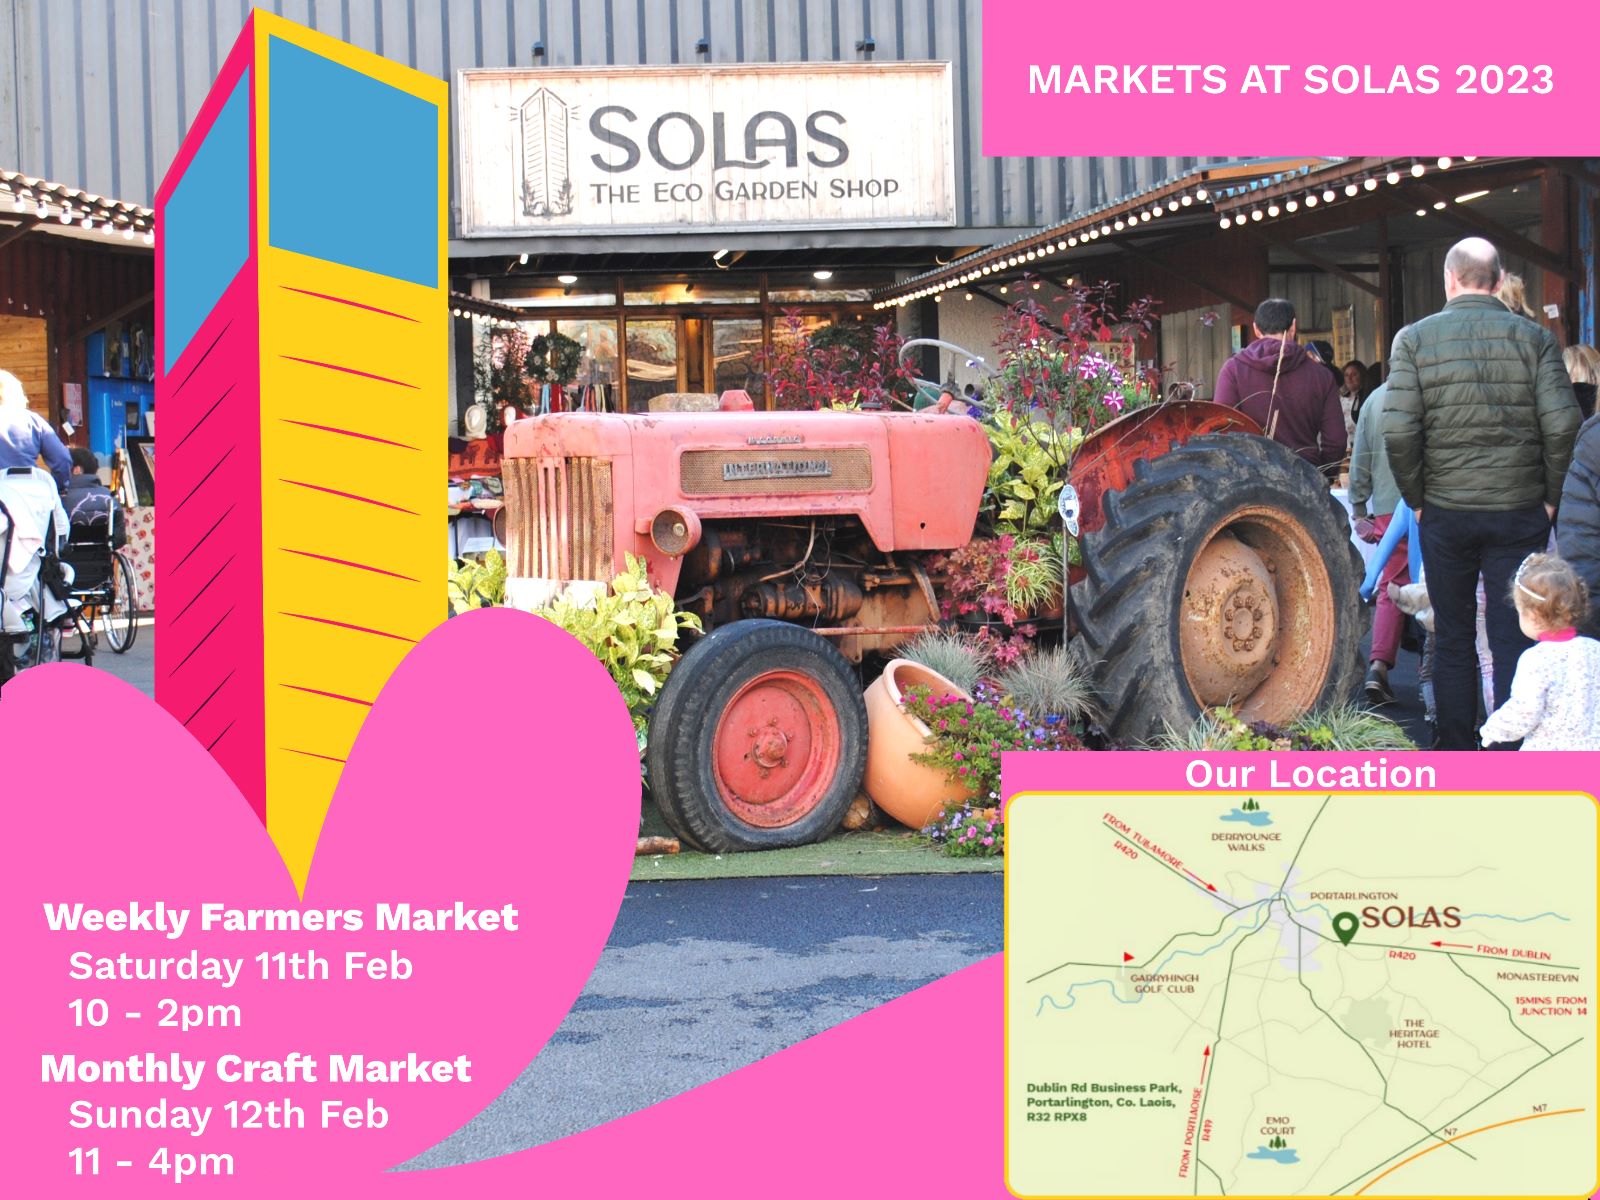 Markets @ SOLAS SOLAS is happy to announce that the Markets are back and are kicking off with a double market weekend with the ‘Weekly Farmers Market’ on Saturday 11 Feb 10-2pm, and a ‘Valentine’s Day Craft Market’ on Sunday 12 February from 11am-4pm. David Maher of SOLAS explains “we have signed up a number of new high quality food producers who will be joining us from our first market of the new year on Saturday 11 February including a number of stalls which will be offering hot market food, meat, bread, fresh local vegetables & confectionary. Moo-Cow milk will be back from our first market so we are really excited for the season ahead.” The Craft market has been timed to make it the perfect date for the romantics out there to spend a fun Sunday strolling the markets and picking out the ideal gift. David Maher continues “Our custom built and covered ‘Market Street’ provides just the perfect setting for markets ensuring a great customer experience regardless of the weather”. Events @ SOLAS SOLAS have We have a busy calendar ahead for the months of February and March: Saturday 11 February Weekly Farmers Market 10am-2pm Sunday 12 February Pregnancy Yoga - 10.30-1.30-pm. Guided relaxation and breath work - Contact Catriona 086 8890005 Valentines Craft Market 11-4pm Sound Meditation with Holistic Health Care 6.30-7.30pm. PRE-BOOKING ESSENTIAL €20 Contact Joan 085 1218908. Check out SOLAS website for more dates https://ecogardenshop.ie/events/ Tuesday 14 February HipHop with Ram 7-8pm. A 6-week course. Suitable for teens and Adults. Contact 089 9425352 to book your place. Other: 24-26 Feb (Circus), 10-19 March (Carnival) Jobs @ SOLAS We are recruiting for a number of positions including a Horticulturist – Full and Part Time Warehouse & Shop Assistants – Full and Part time Interested Parties should send CVs to SOLAS@thegardenshop.ie see https://ecogardenshop.ie/jobs/ Food & Cosy Cafe The SOLAS Cafe offers hot food 7 days a week along with a selection of freshly made sandwiches, cakes, pastries, homemade soup and soda bread. Our hot special this week will be chicken and bacon vol au vent. SOLAS – PLANTS Plant of the week: Hellebores are evergreen hardy plants, ideal for shade or partially shade gardens. They flower during the cold, grey winter months right up to April and bring some colours to our gardens. Wide range available in shop, including 'Winter Bells'& 'Double Ellen Pink' SOLAS – Shop The product of the week is ‘Pure Irish Honey’ which is produced locally in Monastervin, Co. Kildare and is now available in the SOLAS food shop.